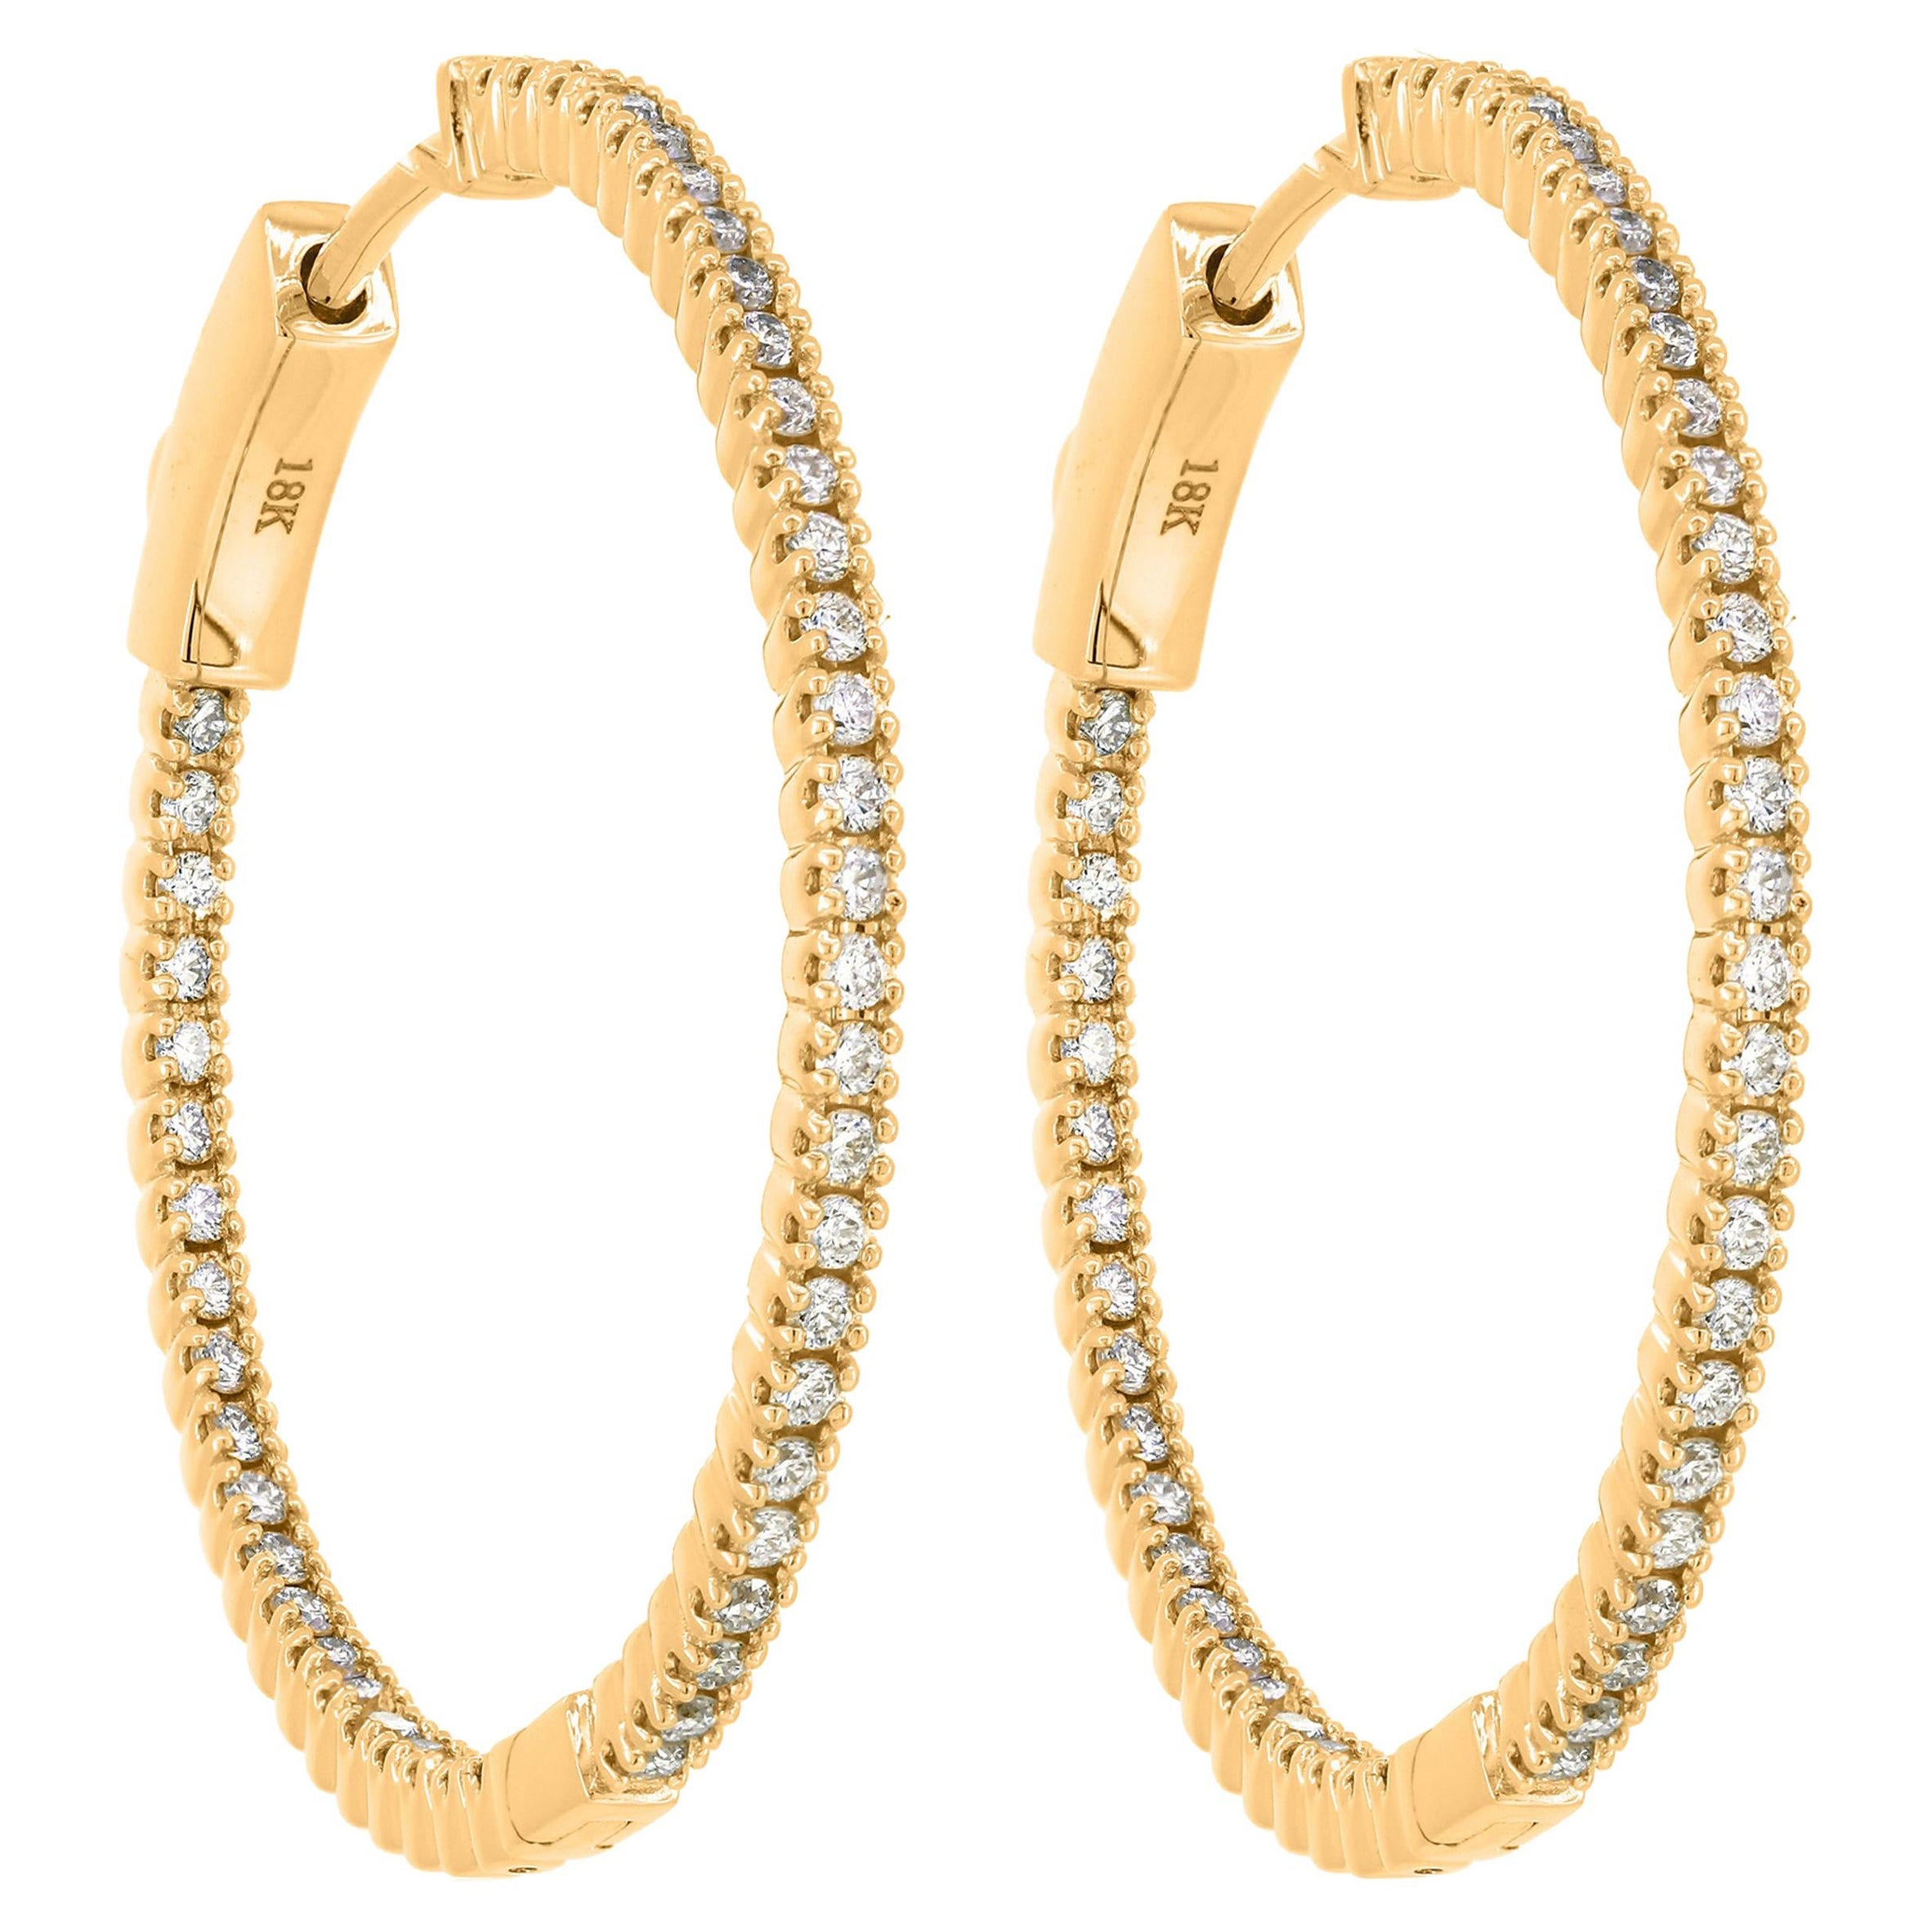 Luxle 0.72cttw. Pave Round Diamond Hoop Earrings 18 Karat Yellow Gold For Sale